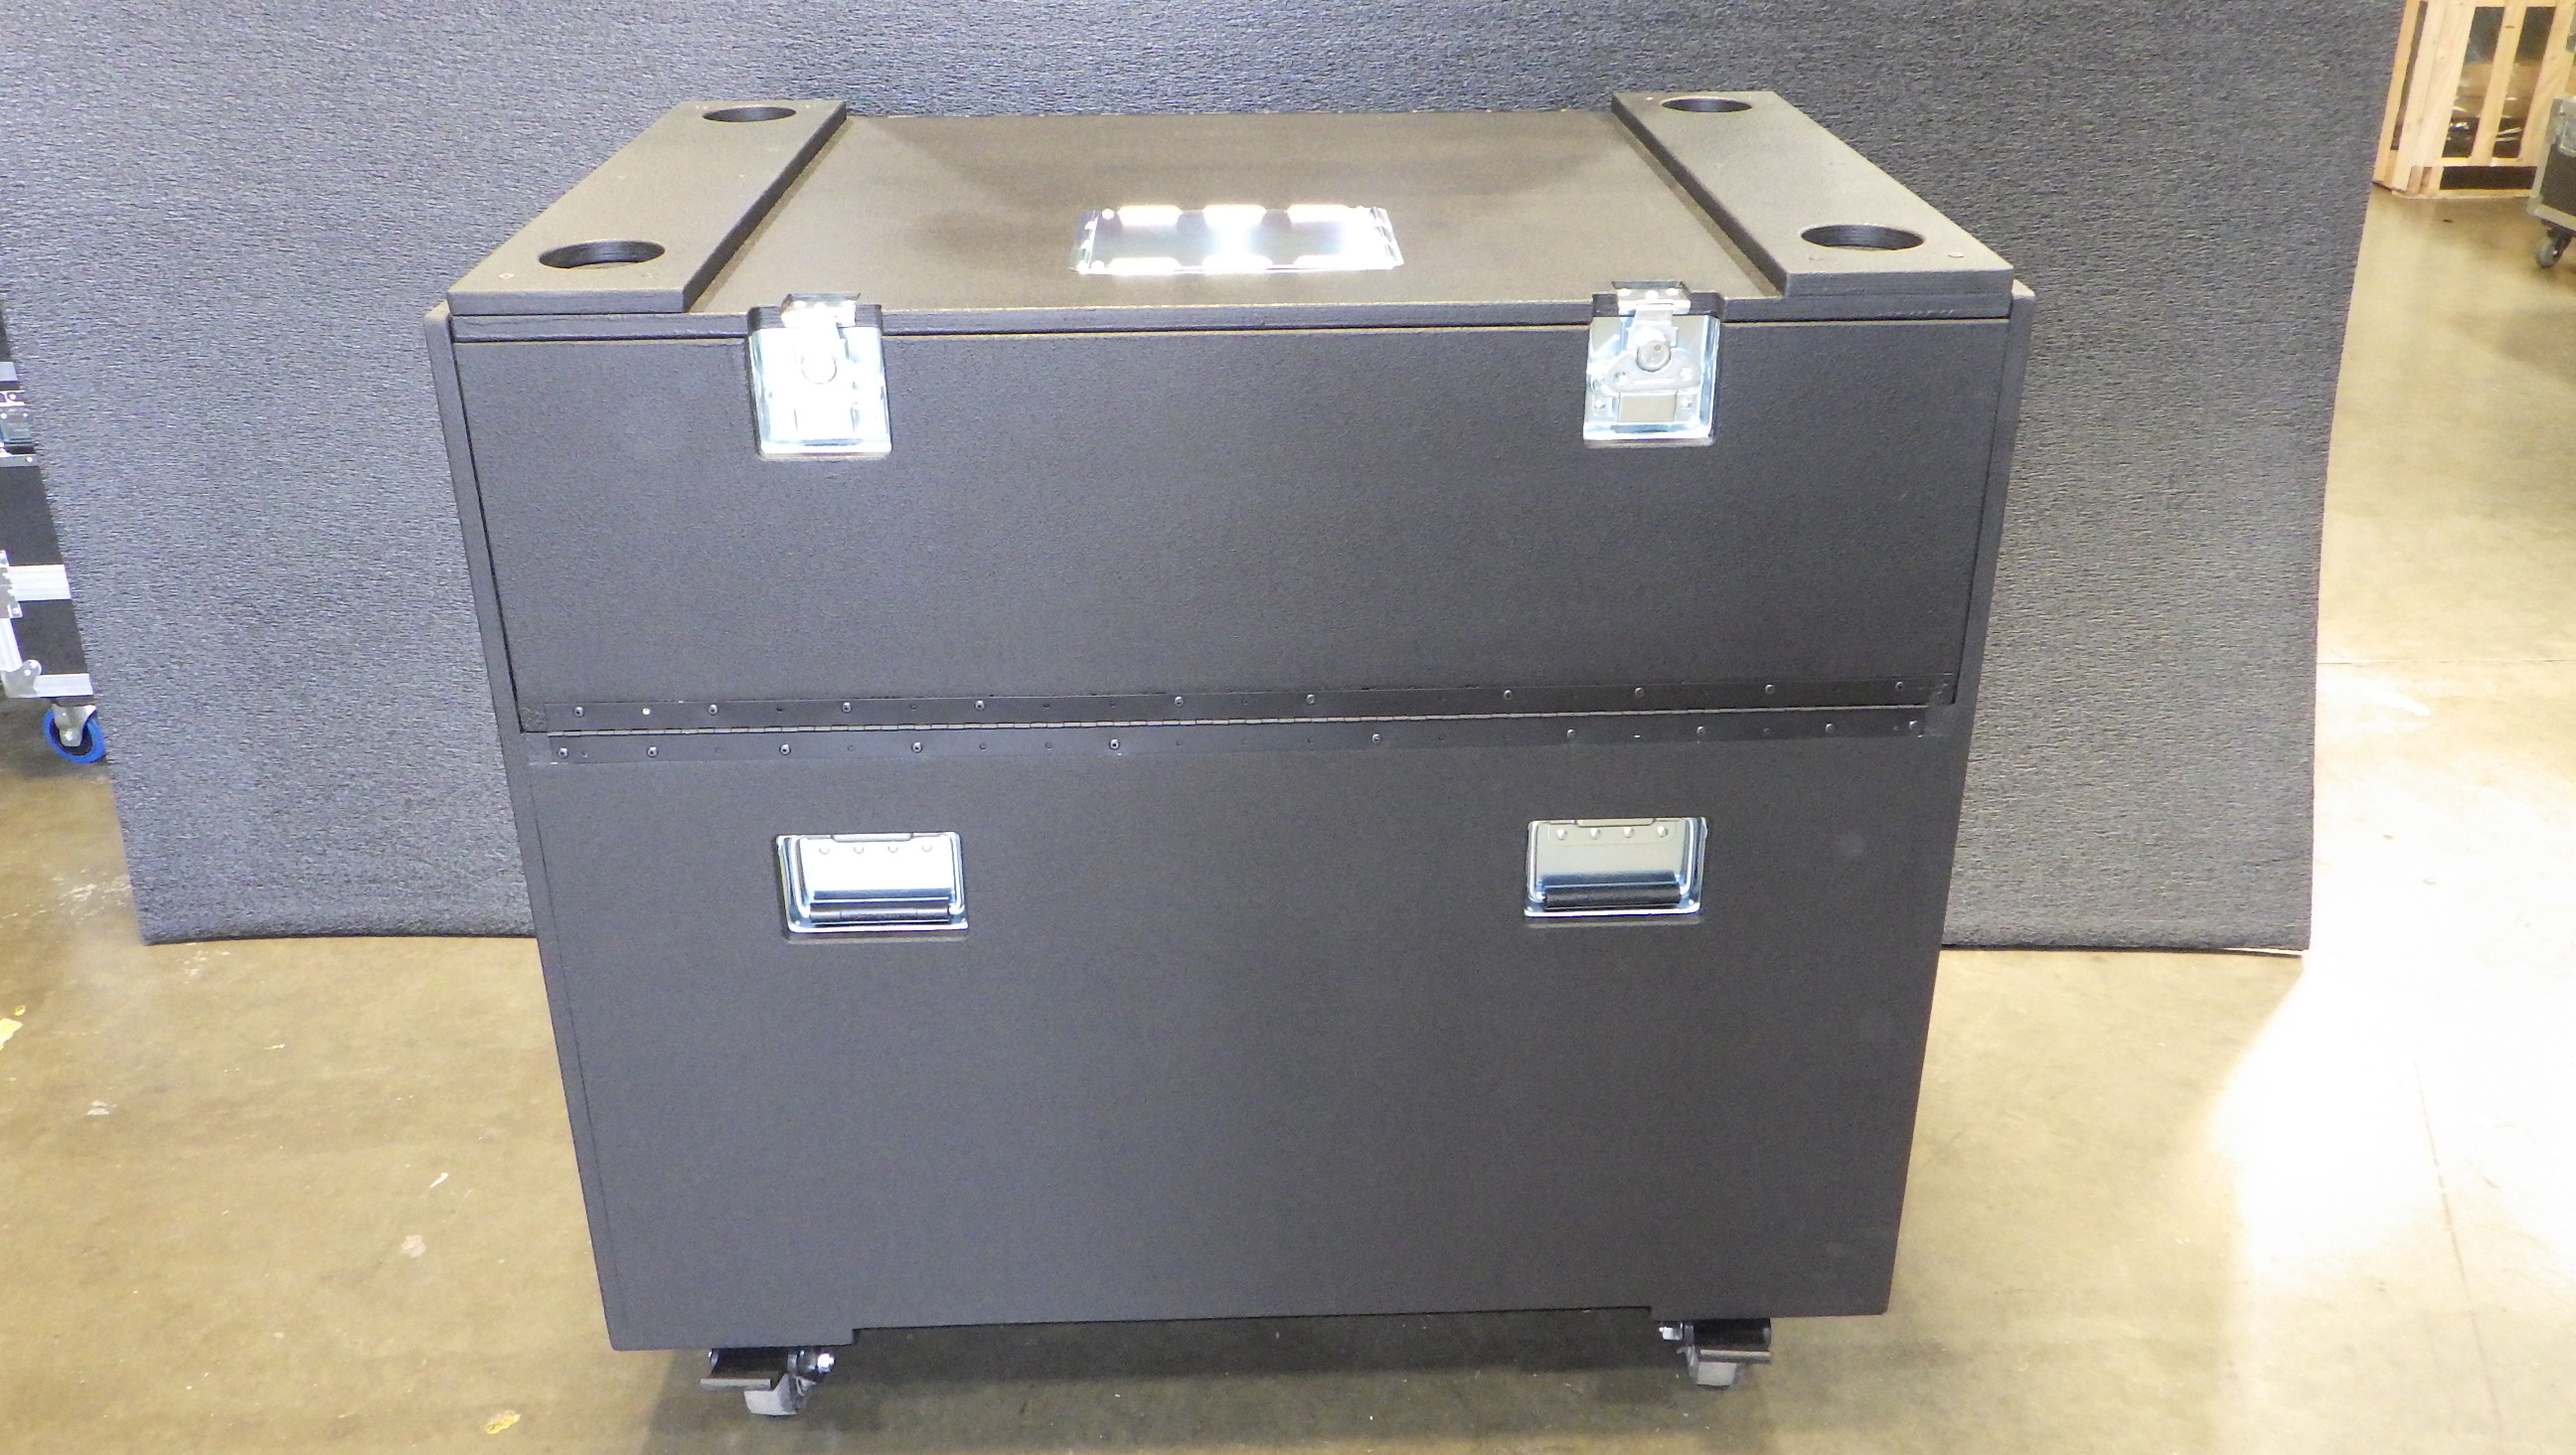 Print # 9772 - 45 x 30 x 42, Cadillac Utility Trunk with Hinged Front Access Door By Nelson Case Corp